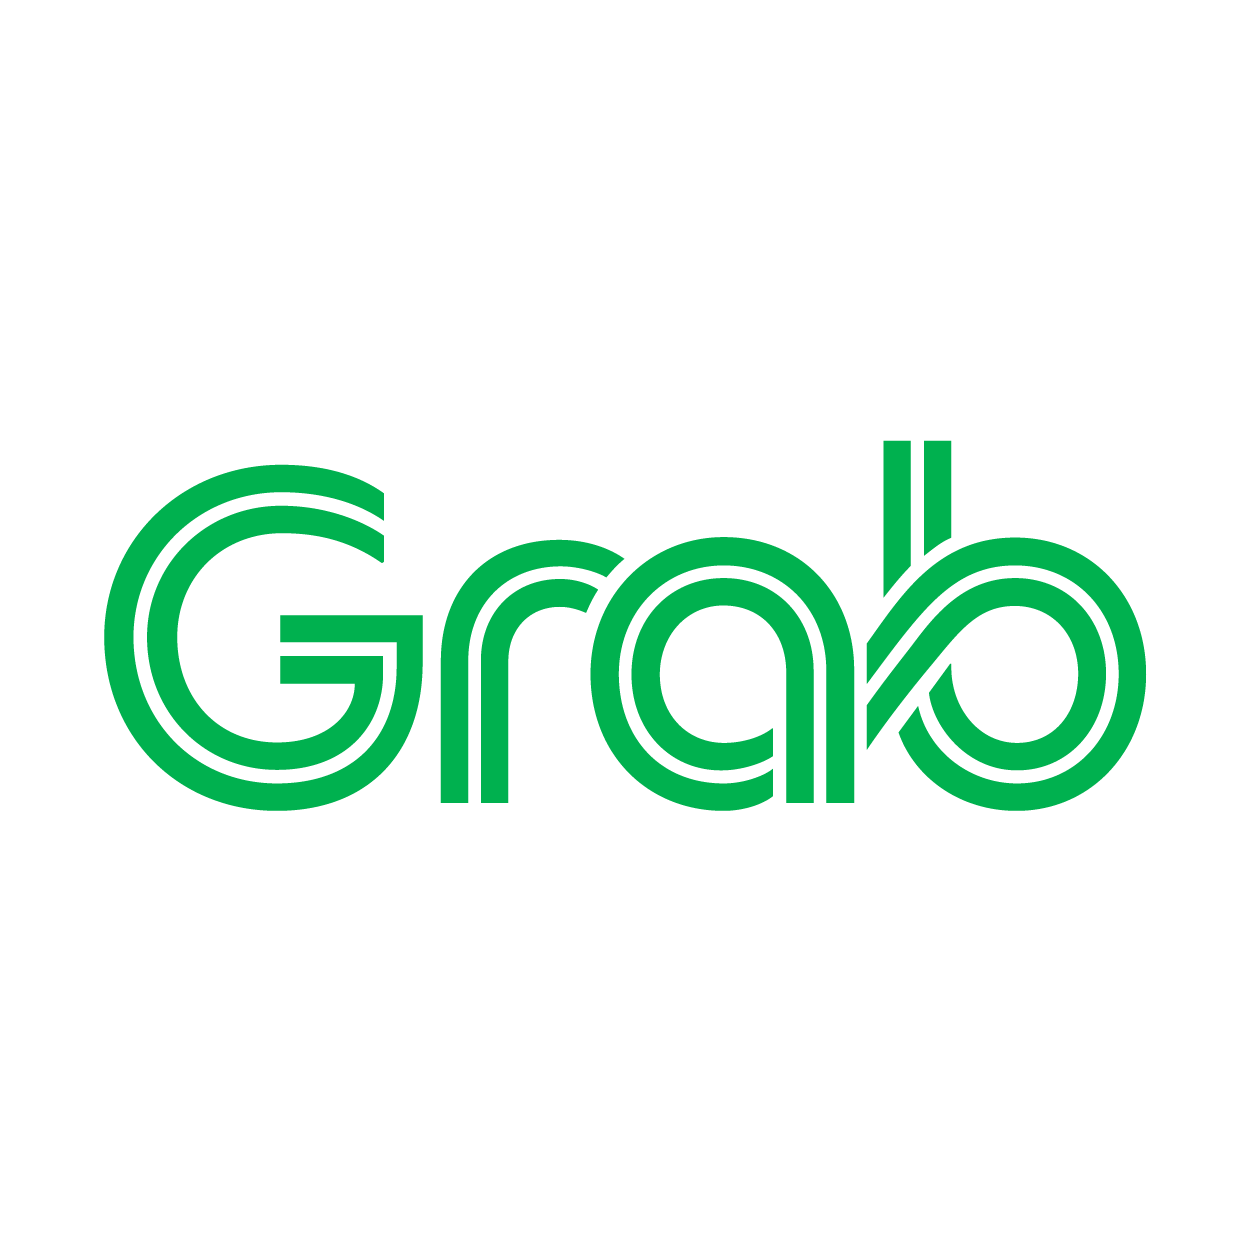 Grab Shares Pop On Q3 Beat, Guidance Boost